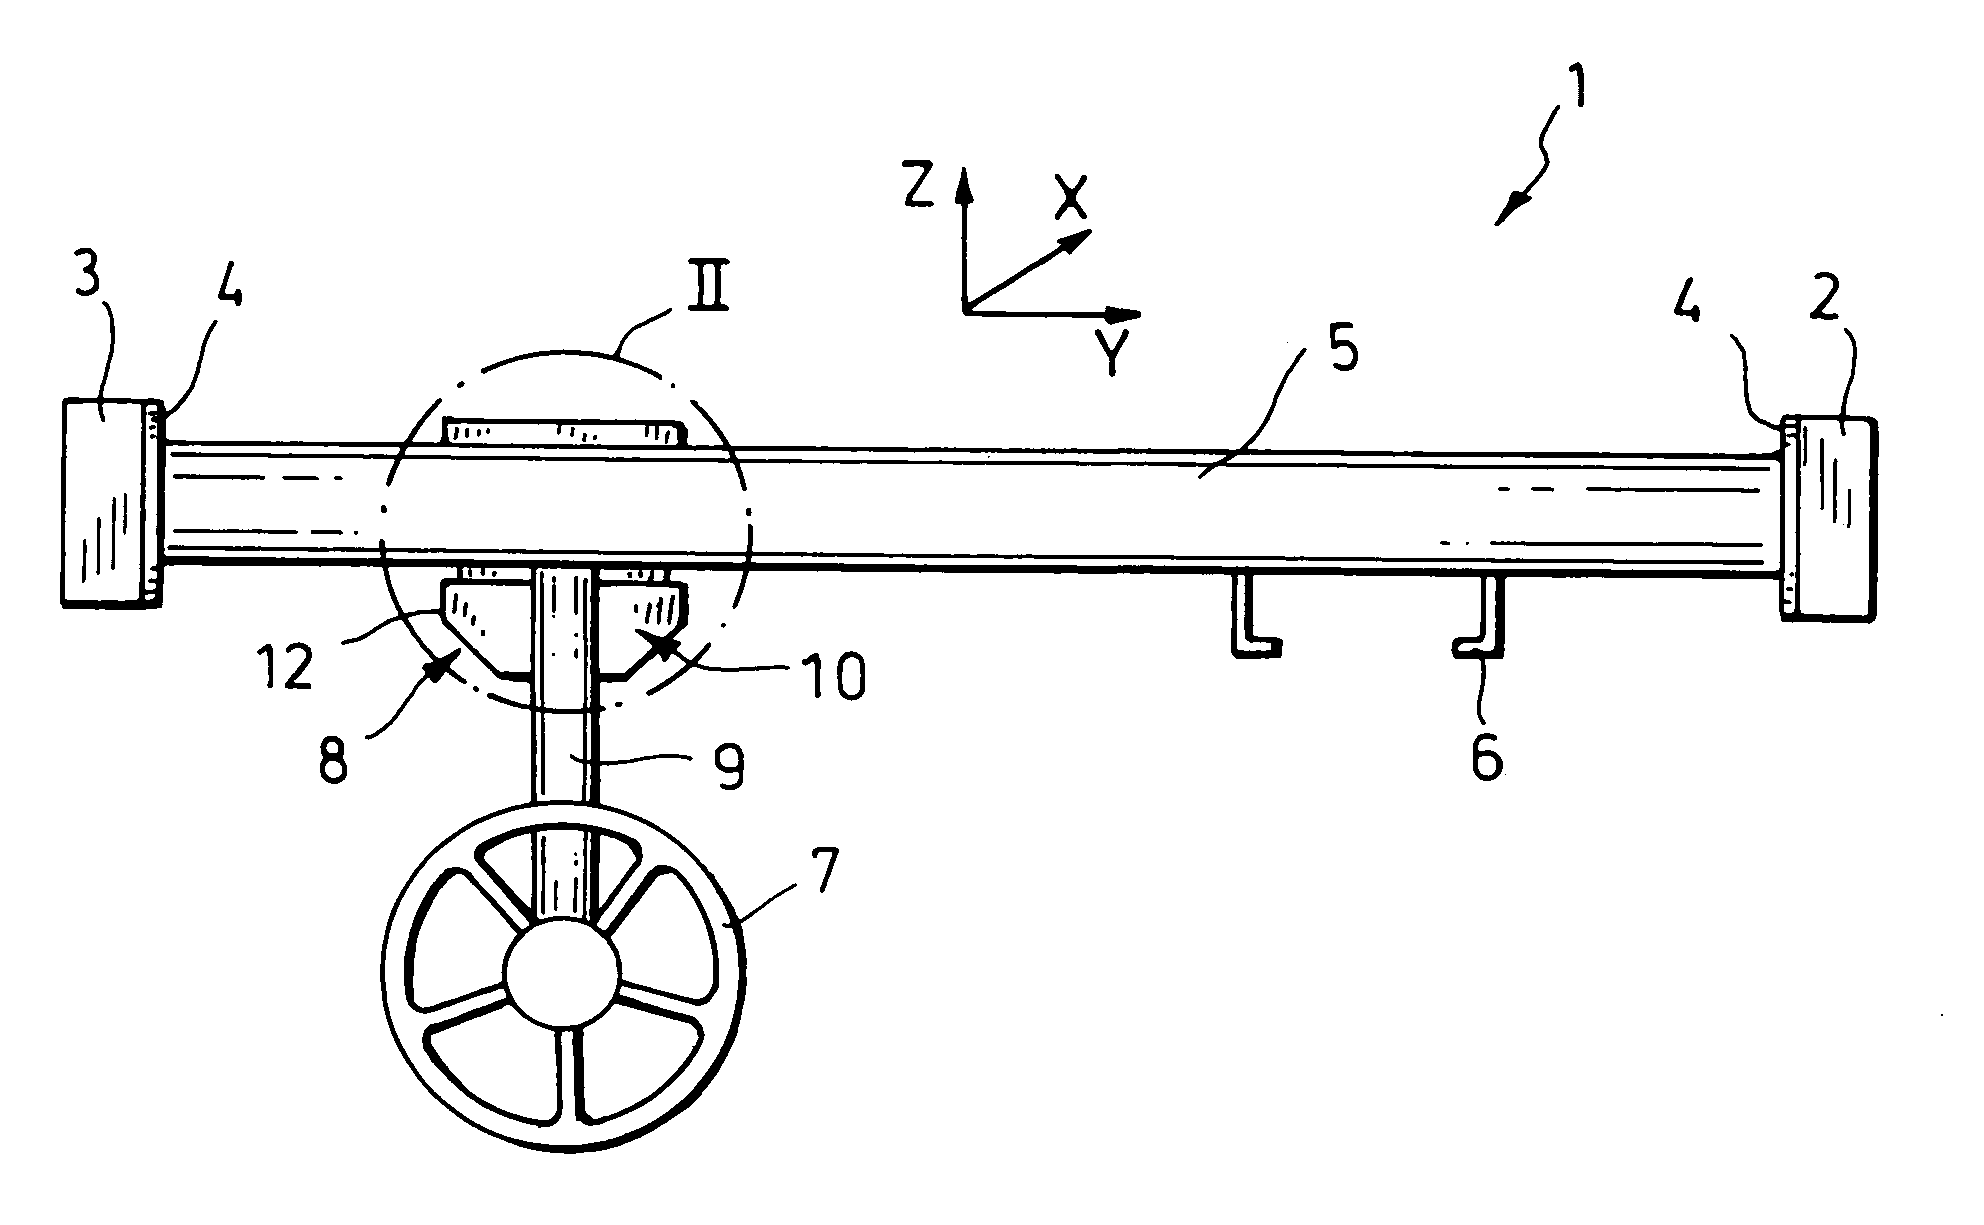 Dashboard support with single-mass oscillation for vibration damping